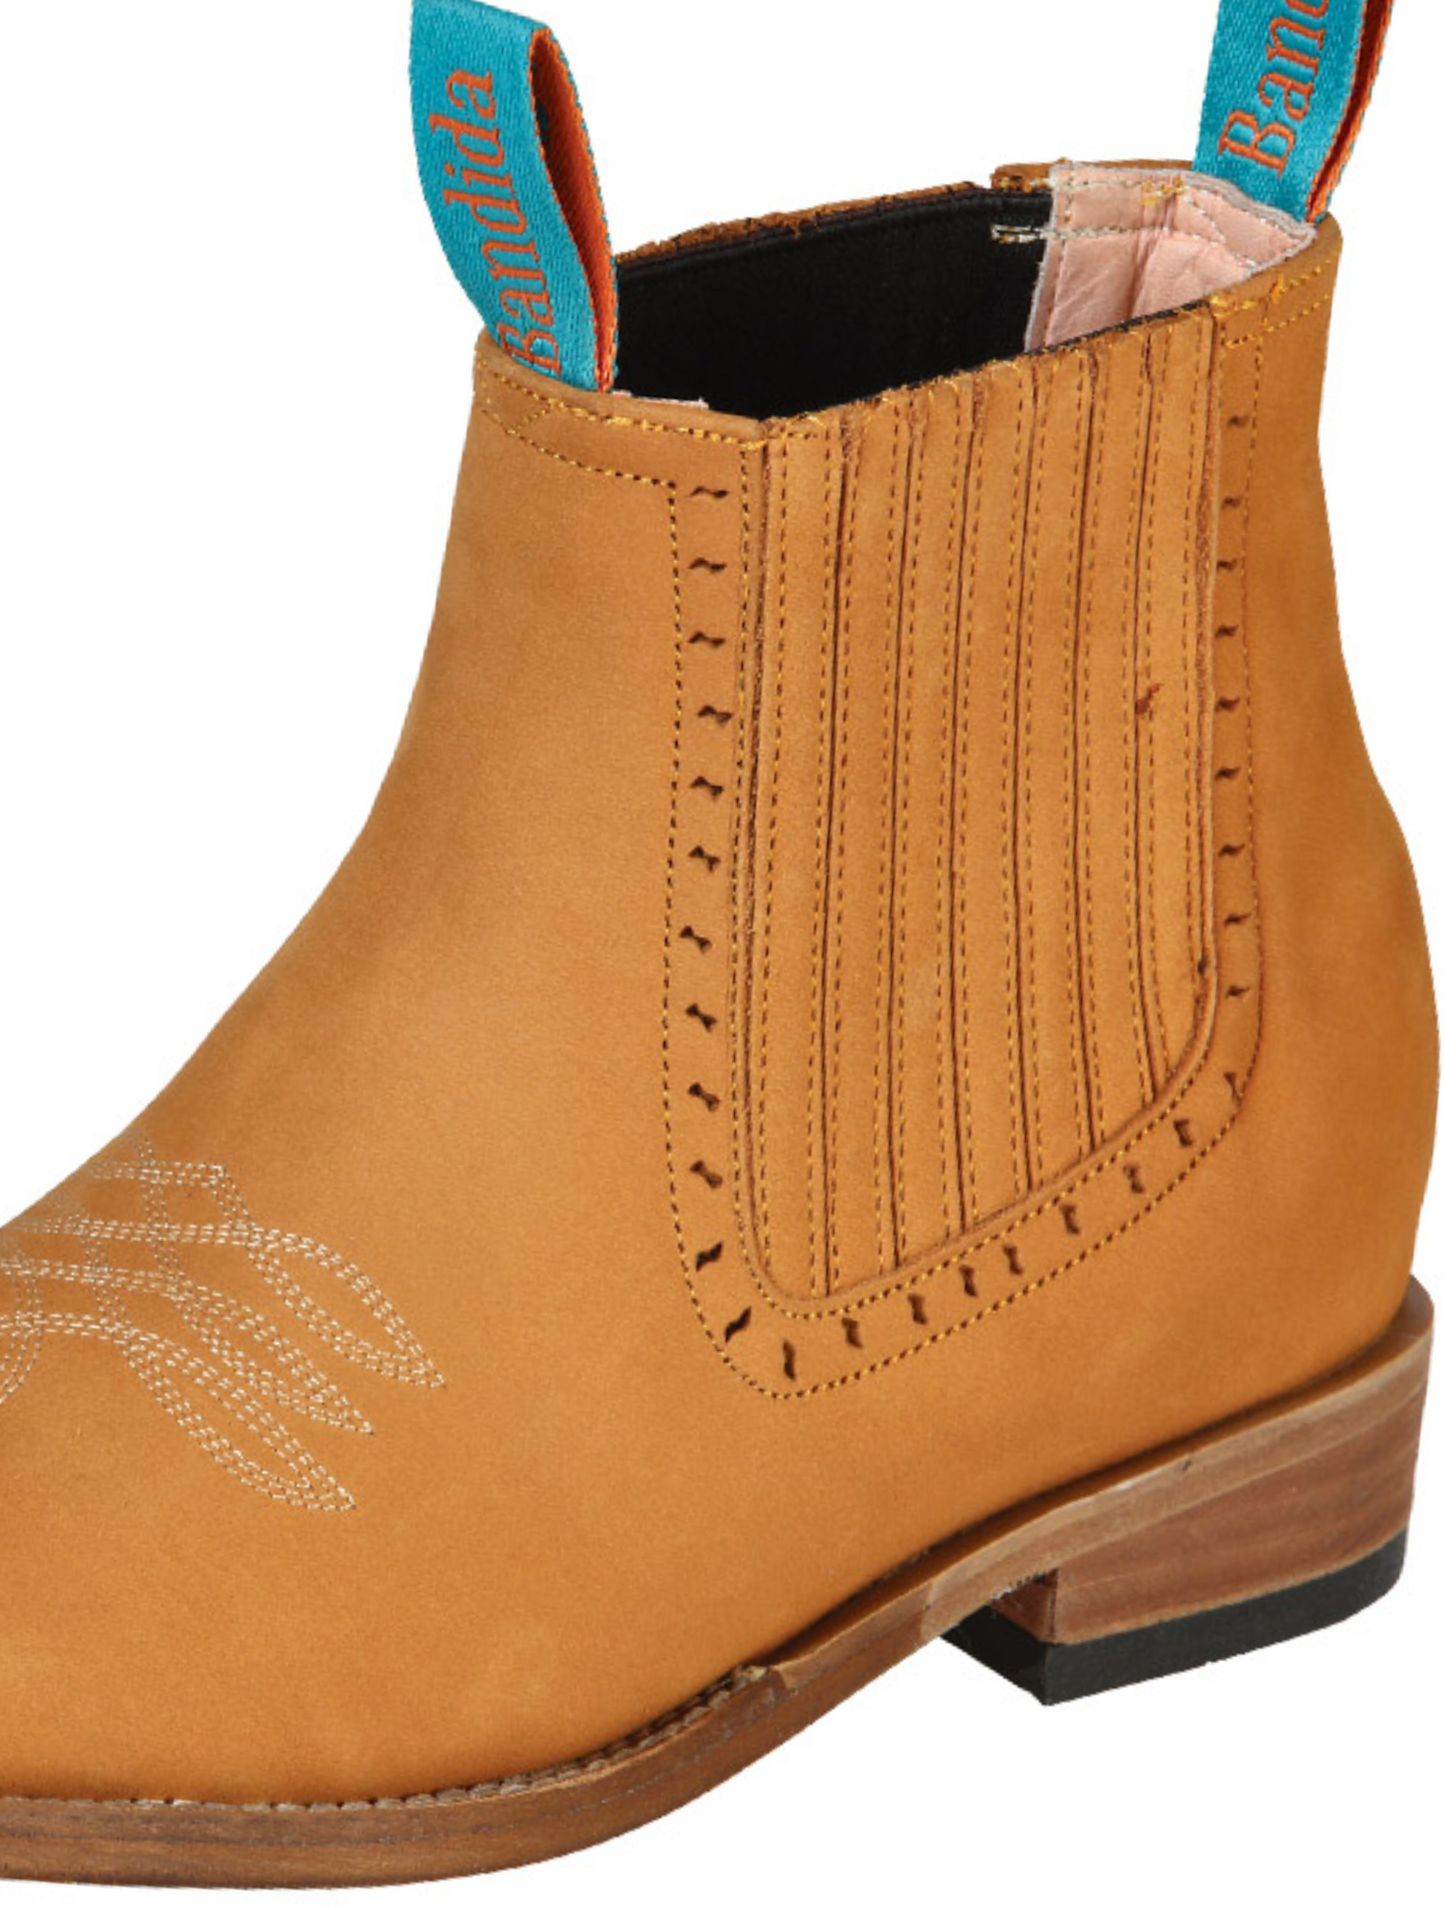 Classic Nubuck Leather Rodeo Cowboy Ankle Boots for Women 'La Barca' - ID: 126664 Western Ankle Boots La Barca